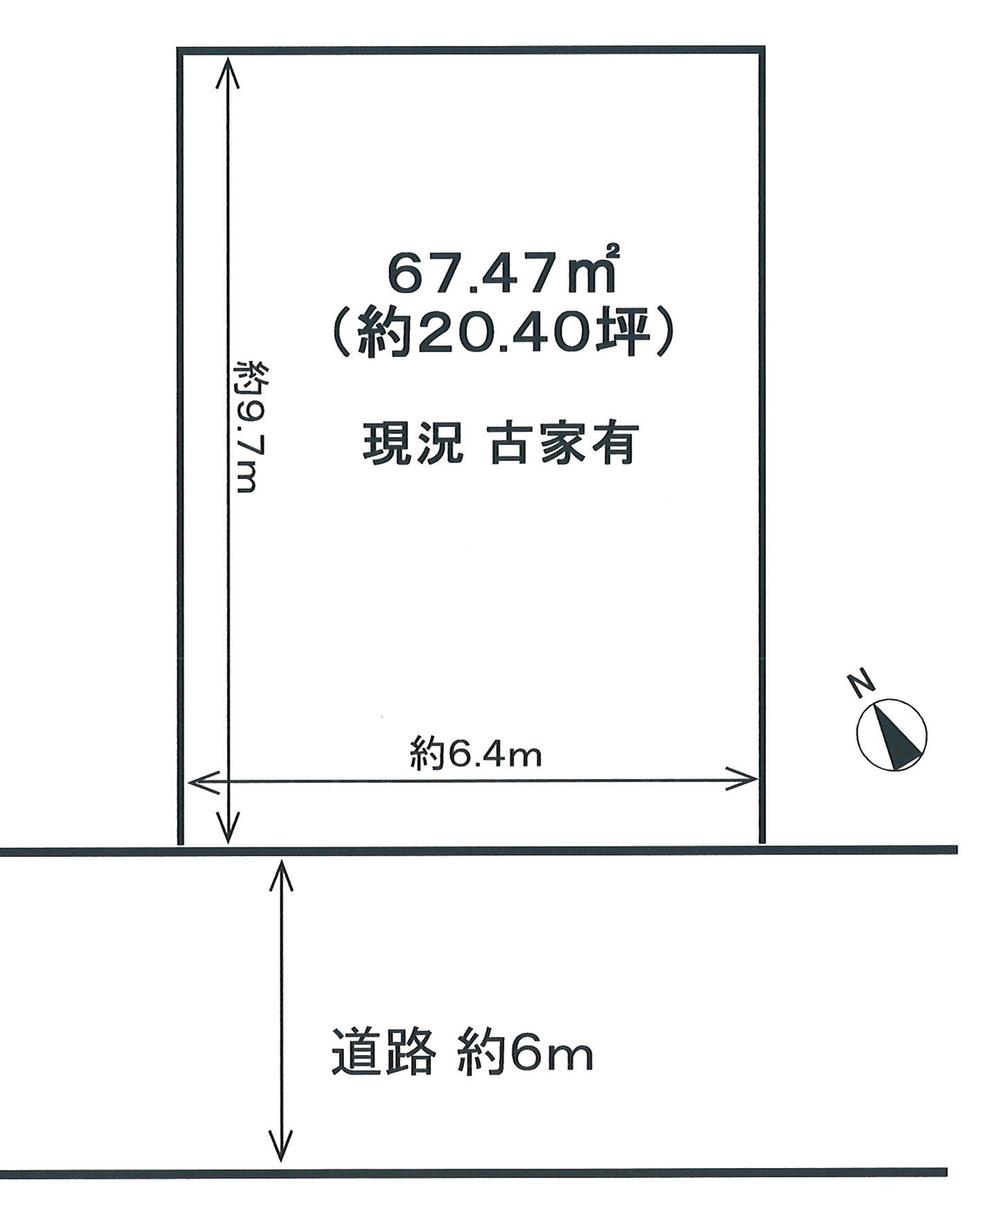 Compartment figure. Land price 36,600,000 yen, About 6.4m contact road to the land area 67.47 sq m width 6.0m southwest side of the road